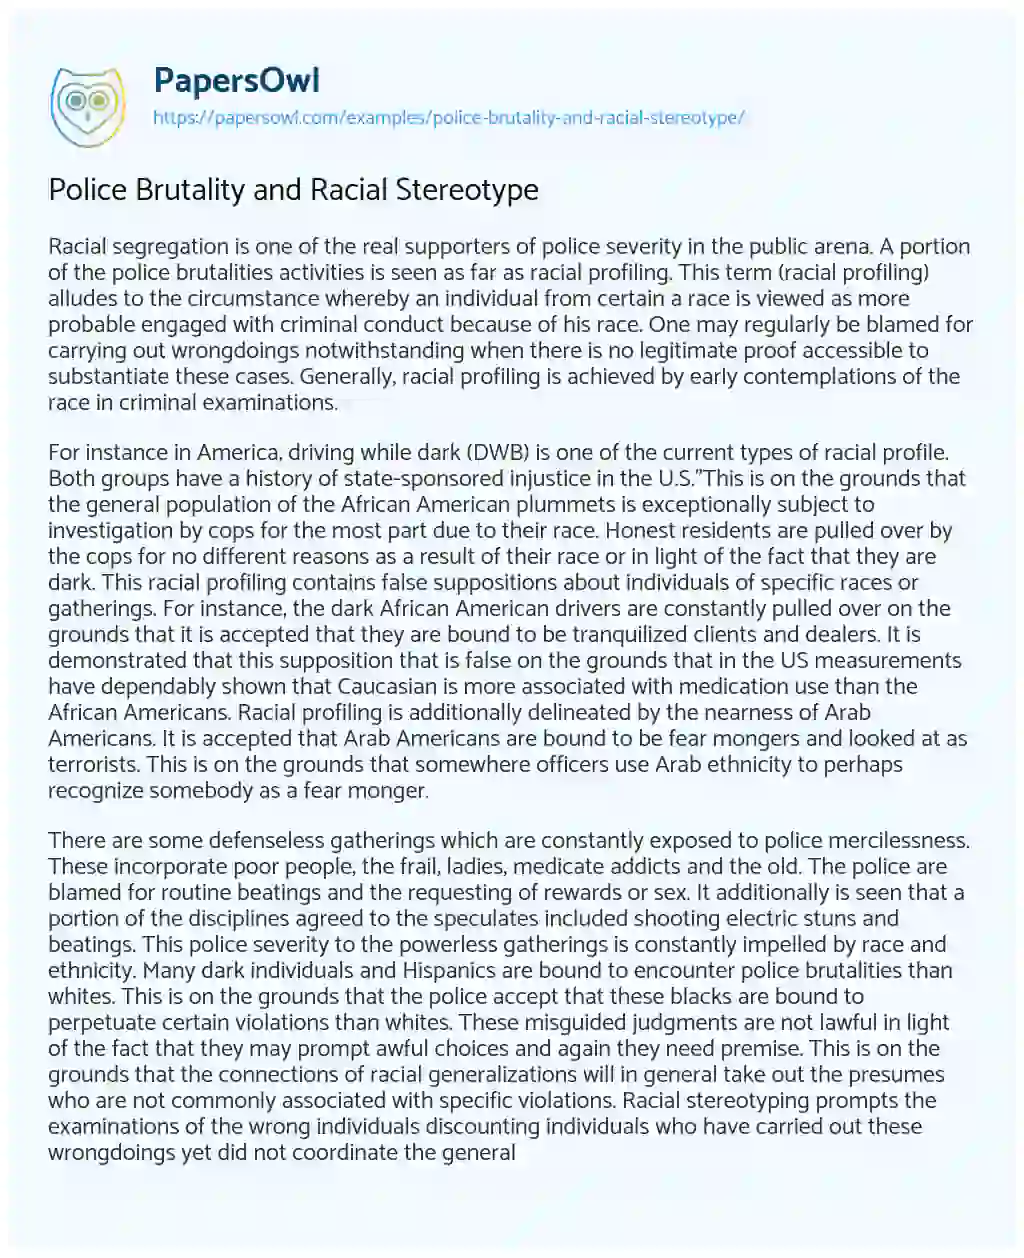 Police Brutality and Racial Stereotype essay